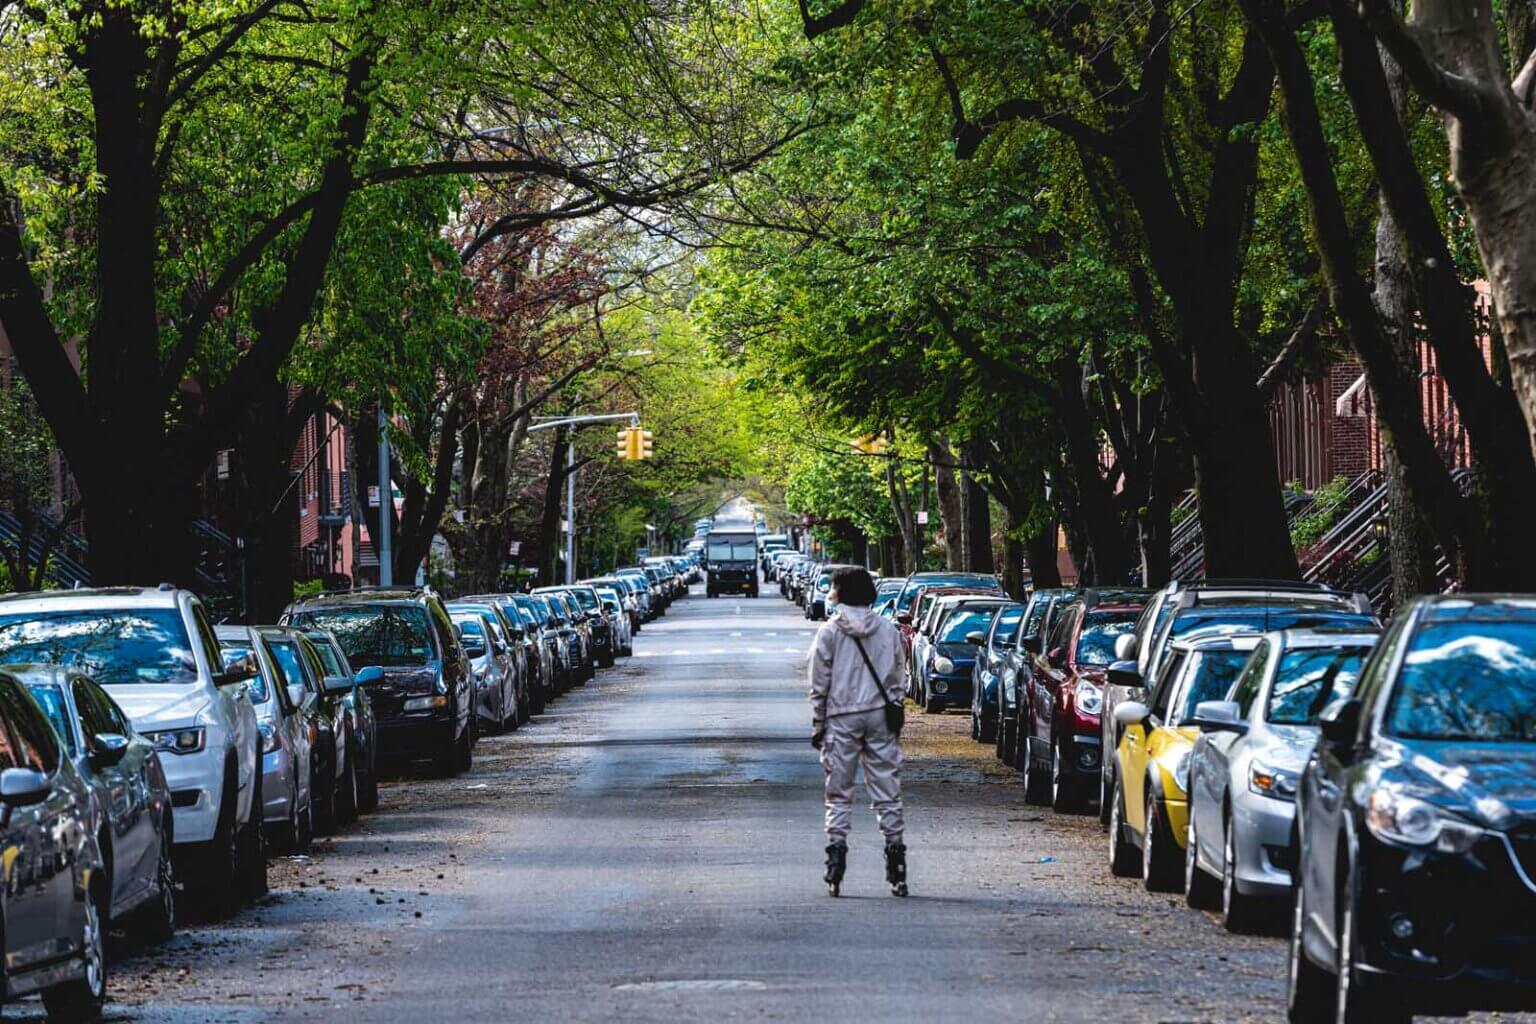 rollerblader down the streets in Park Slope